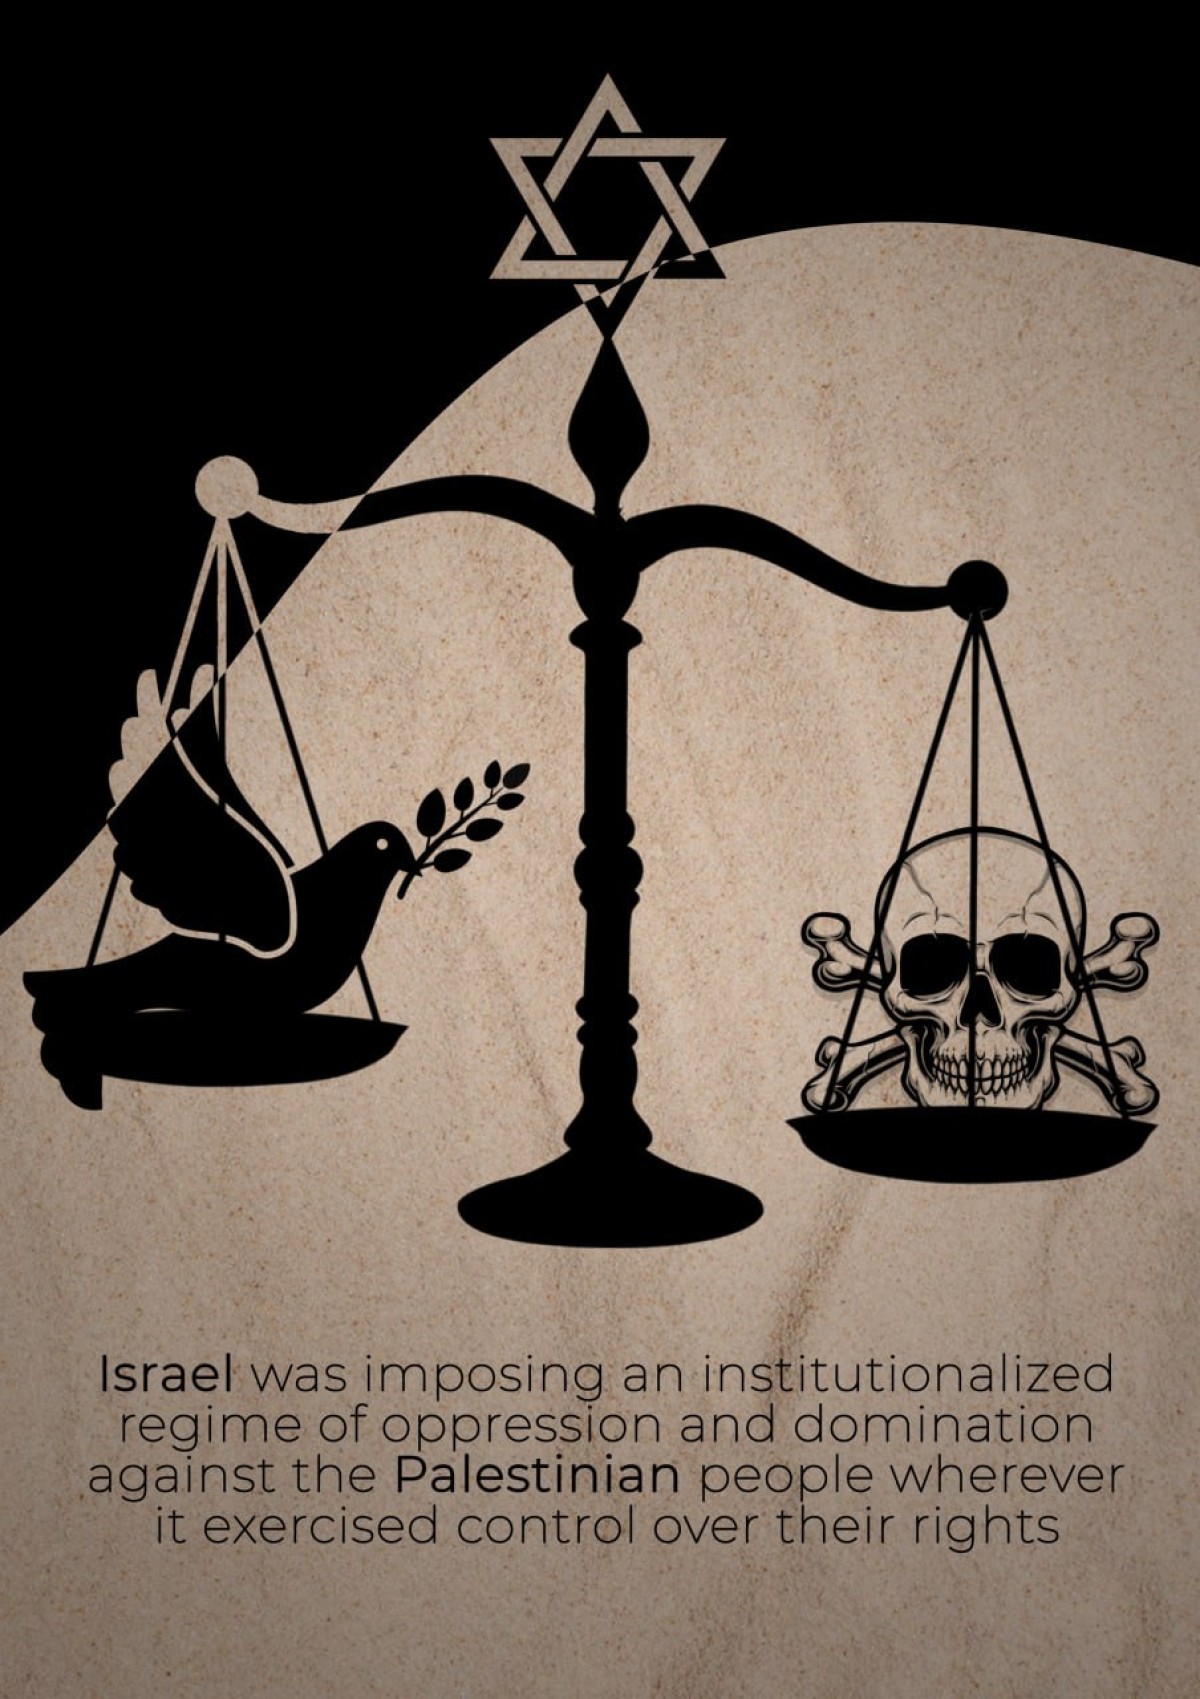 Israel was imposing an institutionalized regime of oppression and domination against the Palestinian people wherever it exercised control over their rights